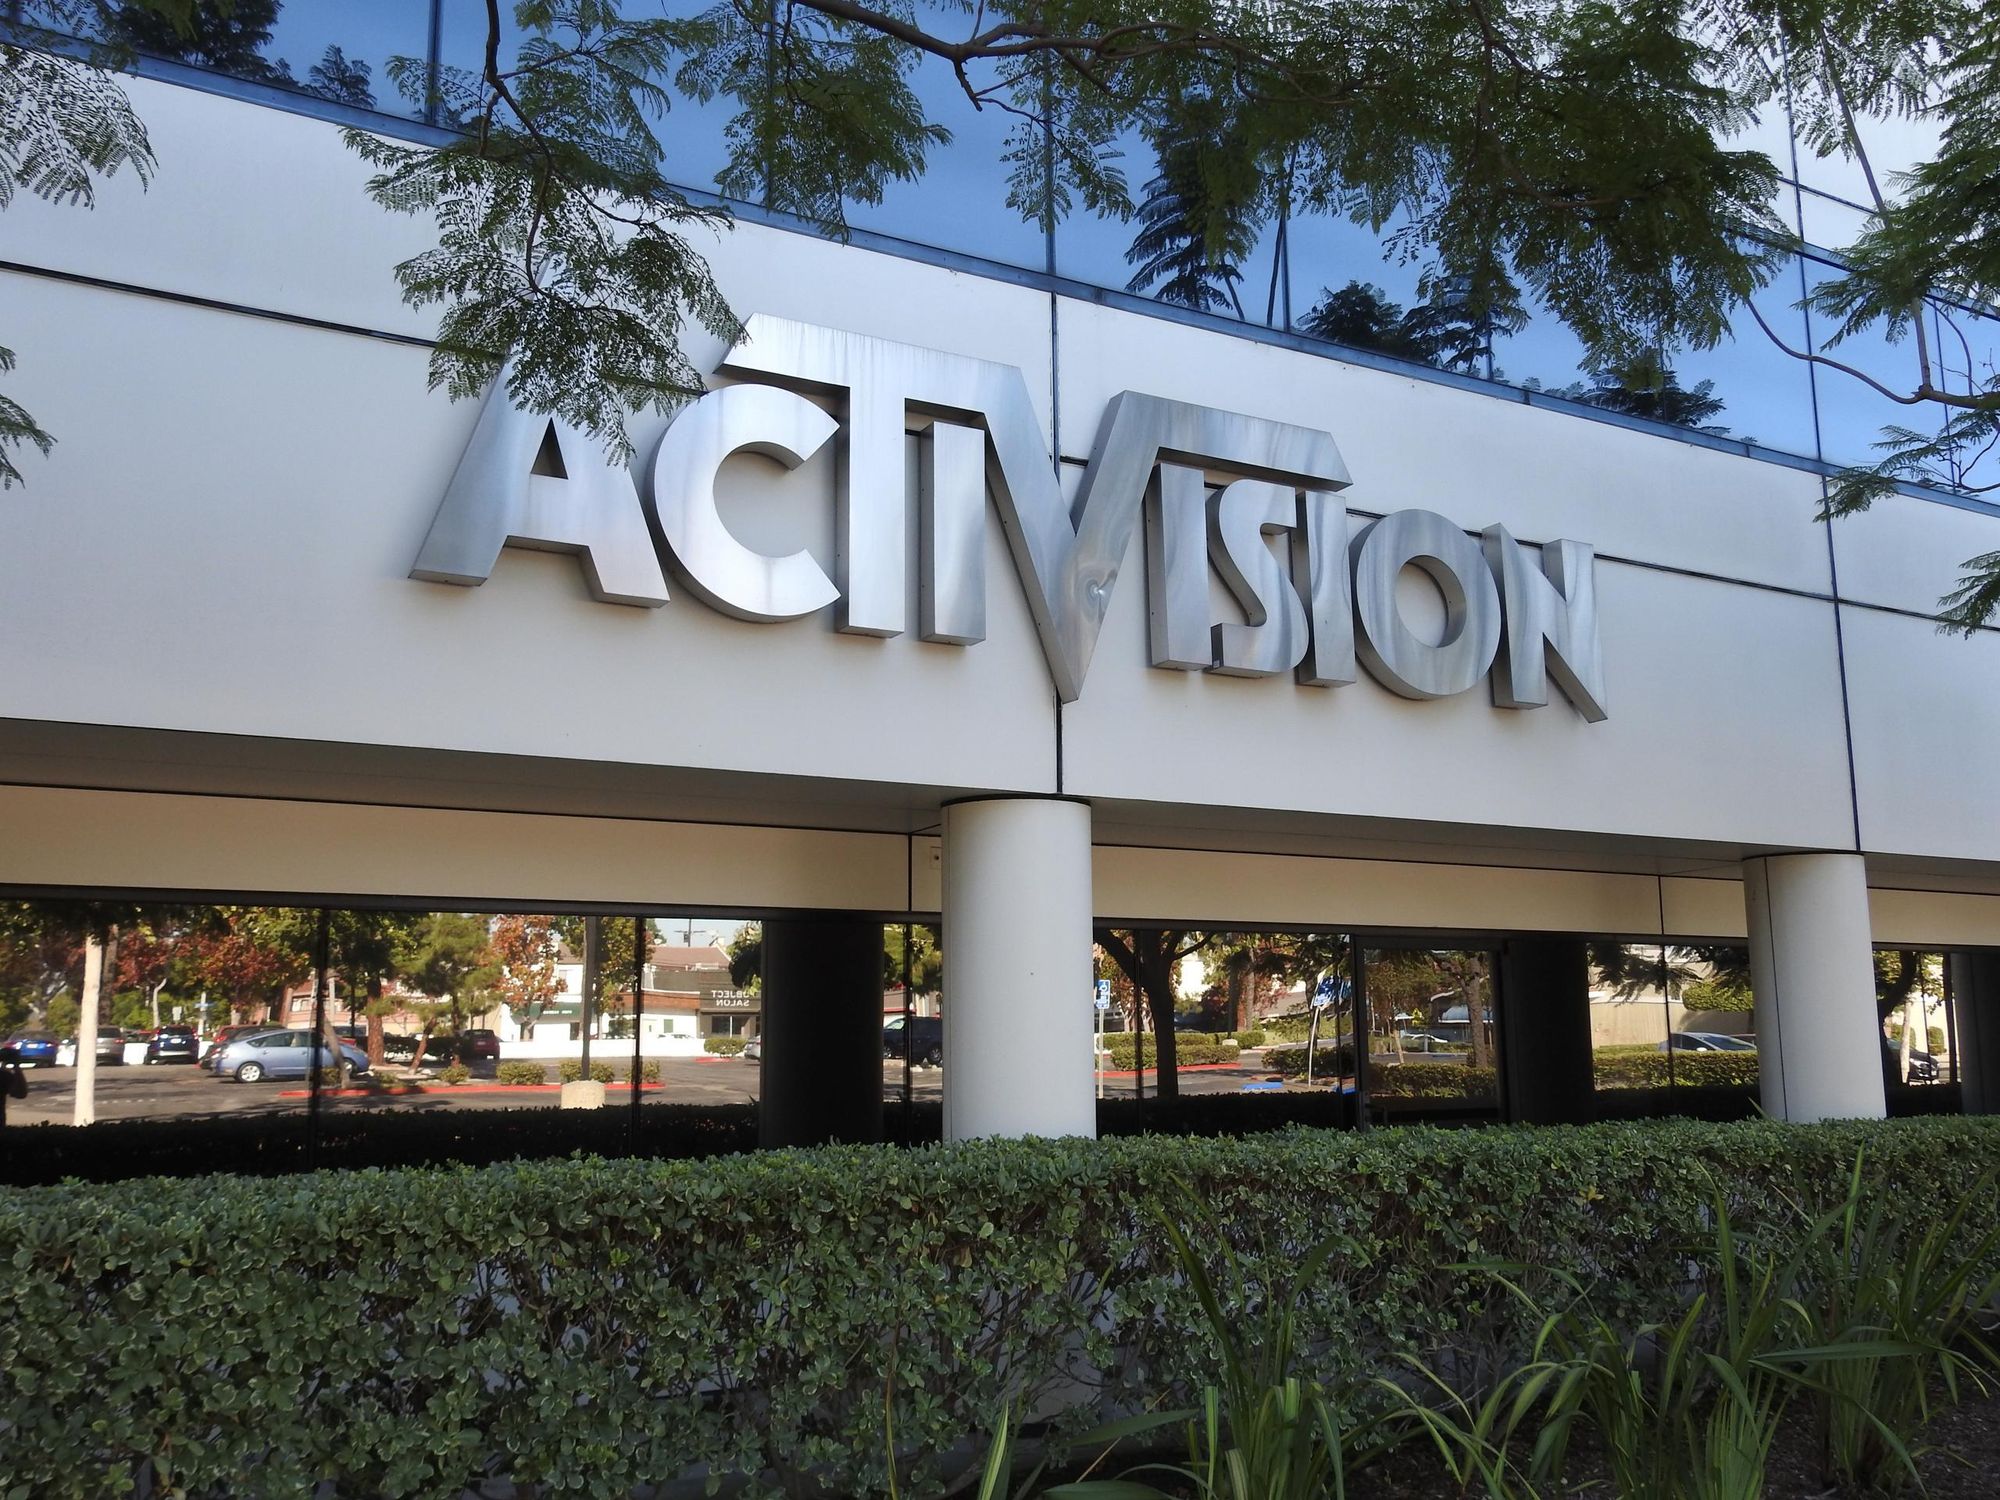 Activision Reverses Vaccine Mandate Removal After Workers Walk Out